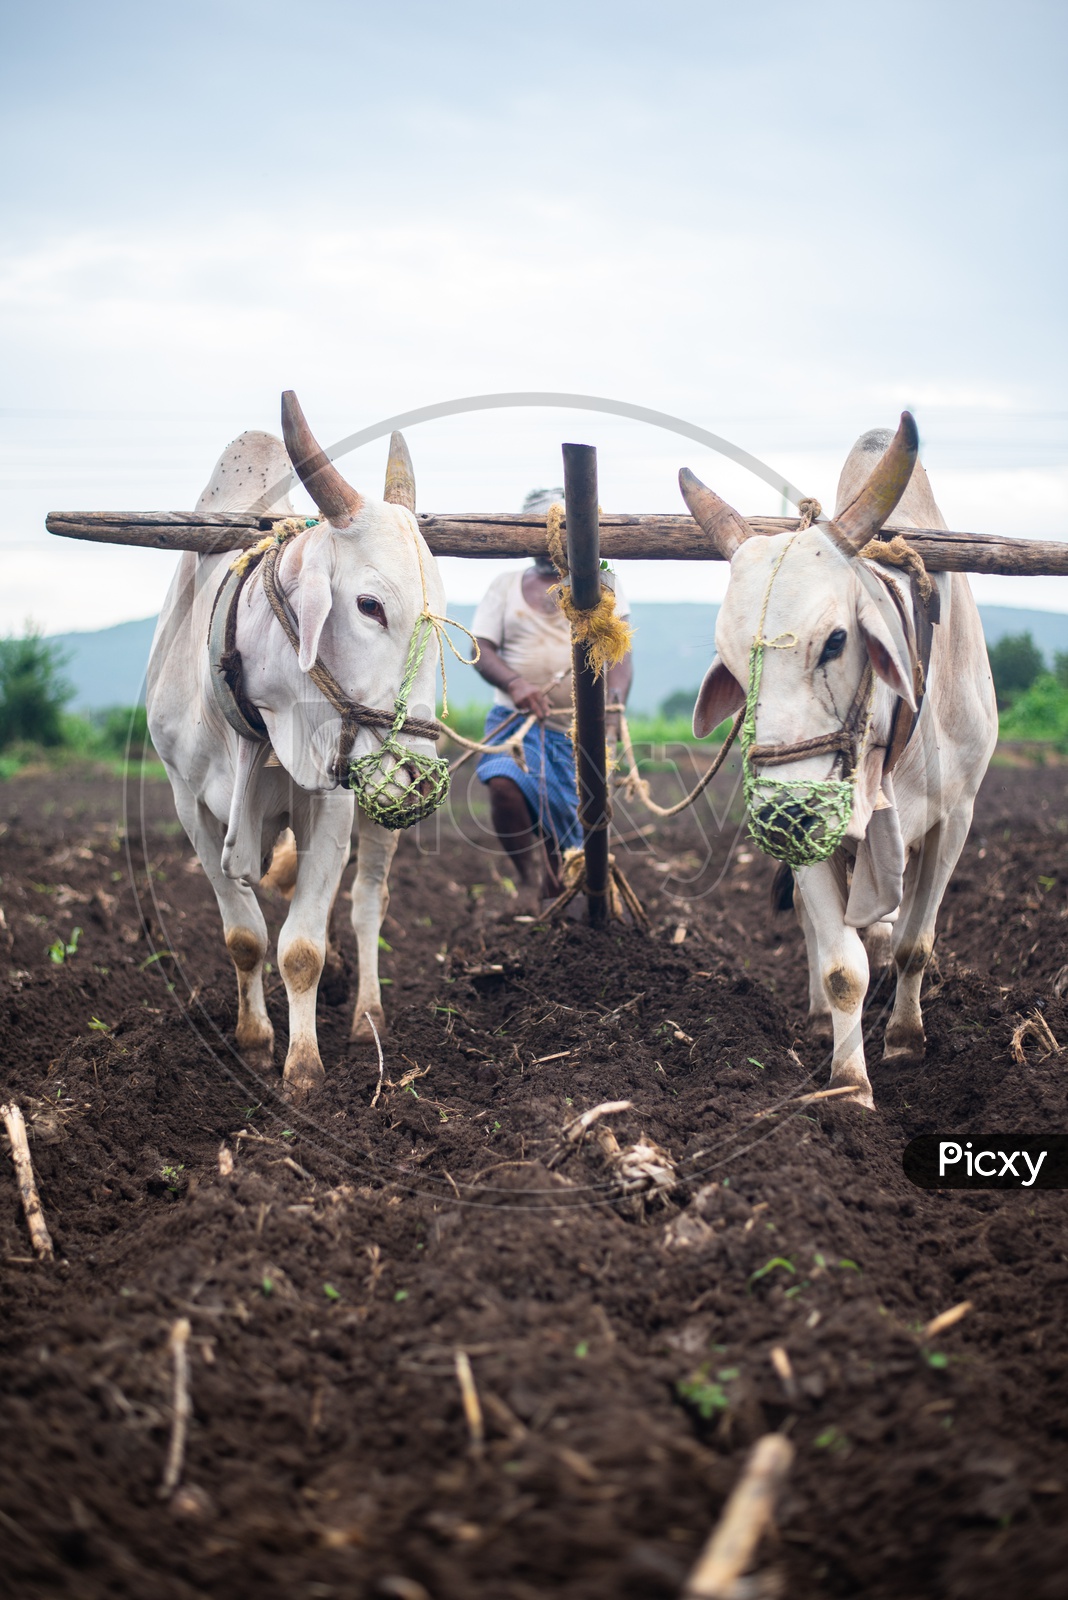 Oxen/Bulls ploughing/plowing a field for Turmeric crop